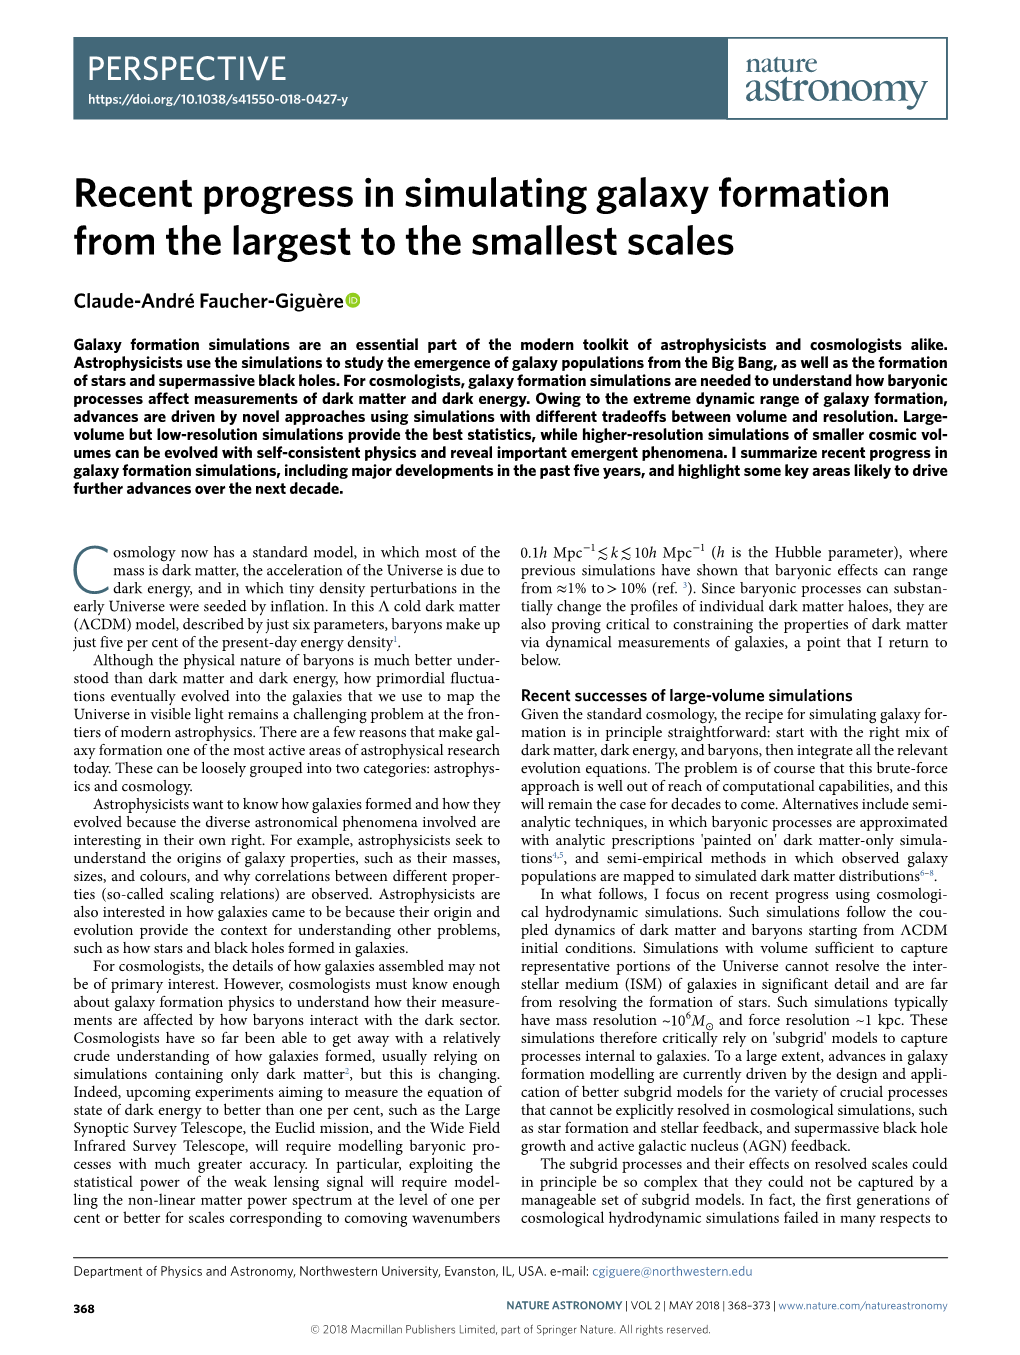 Recent Progress in Simulating Galaxy Formation from the Largest to the Smallest Scales